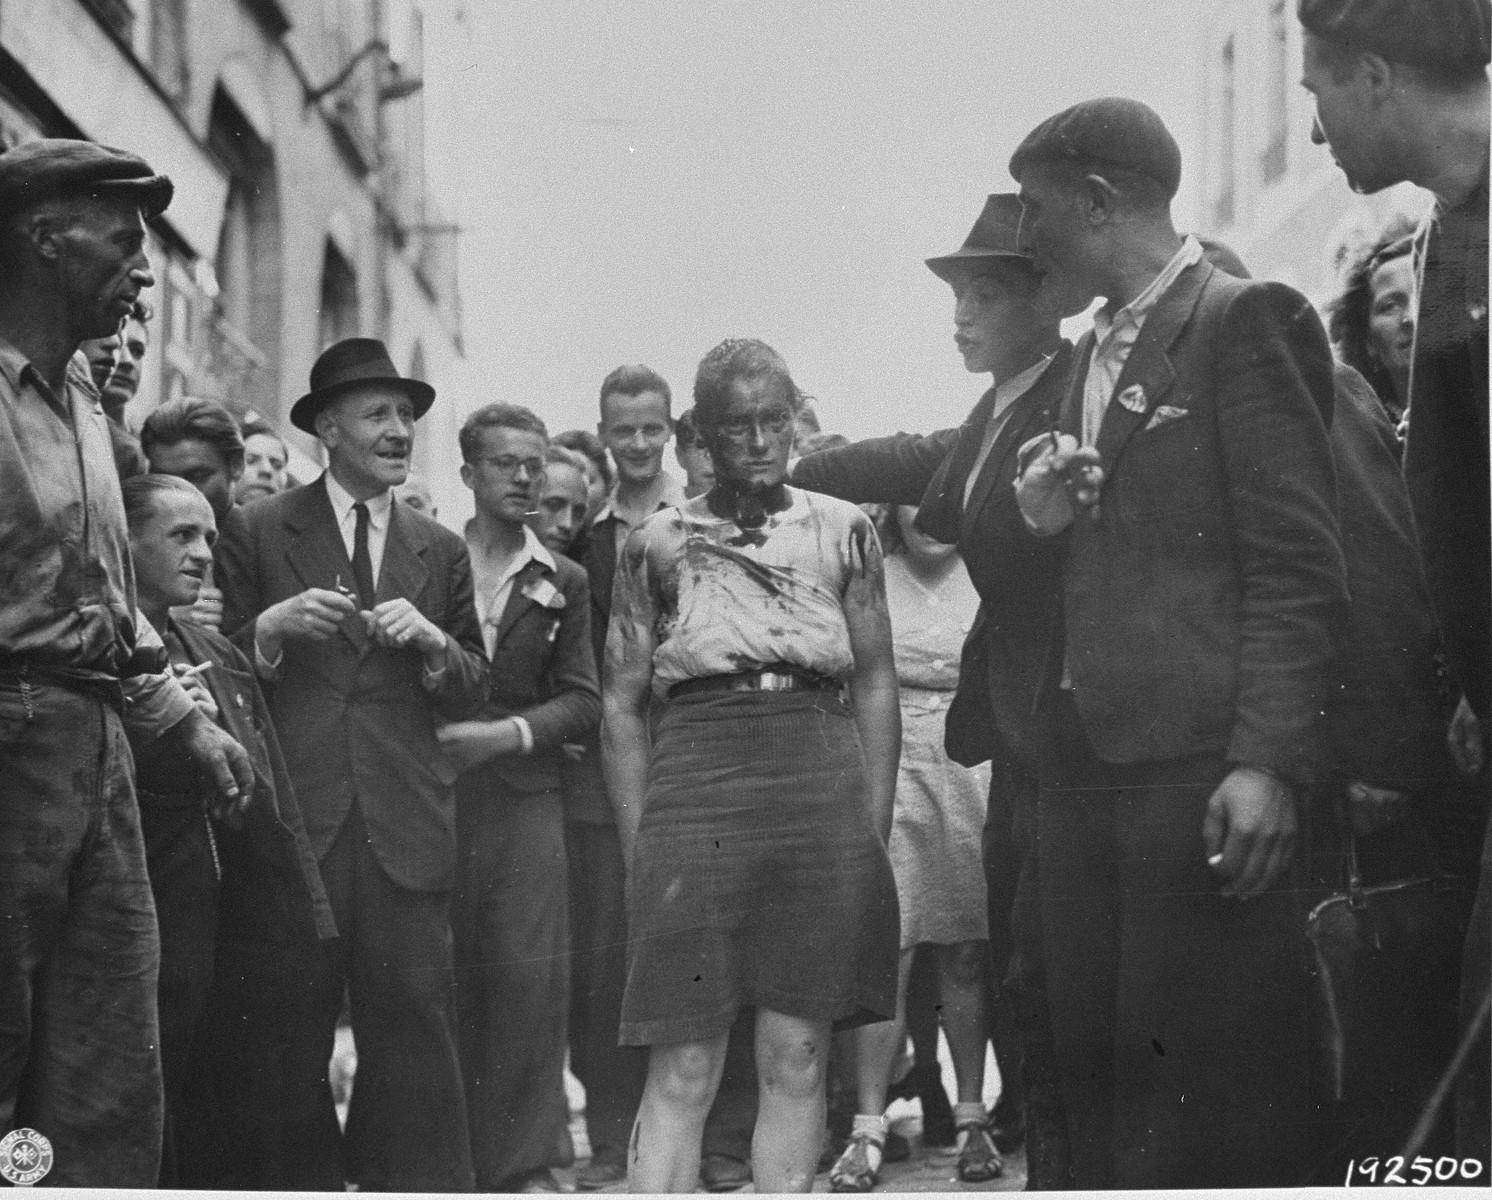 Civilians and members of the French resistance lead a female collaborator through the streets of Rennes after her head was shaven and covered with iodine.